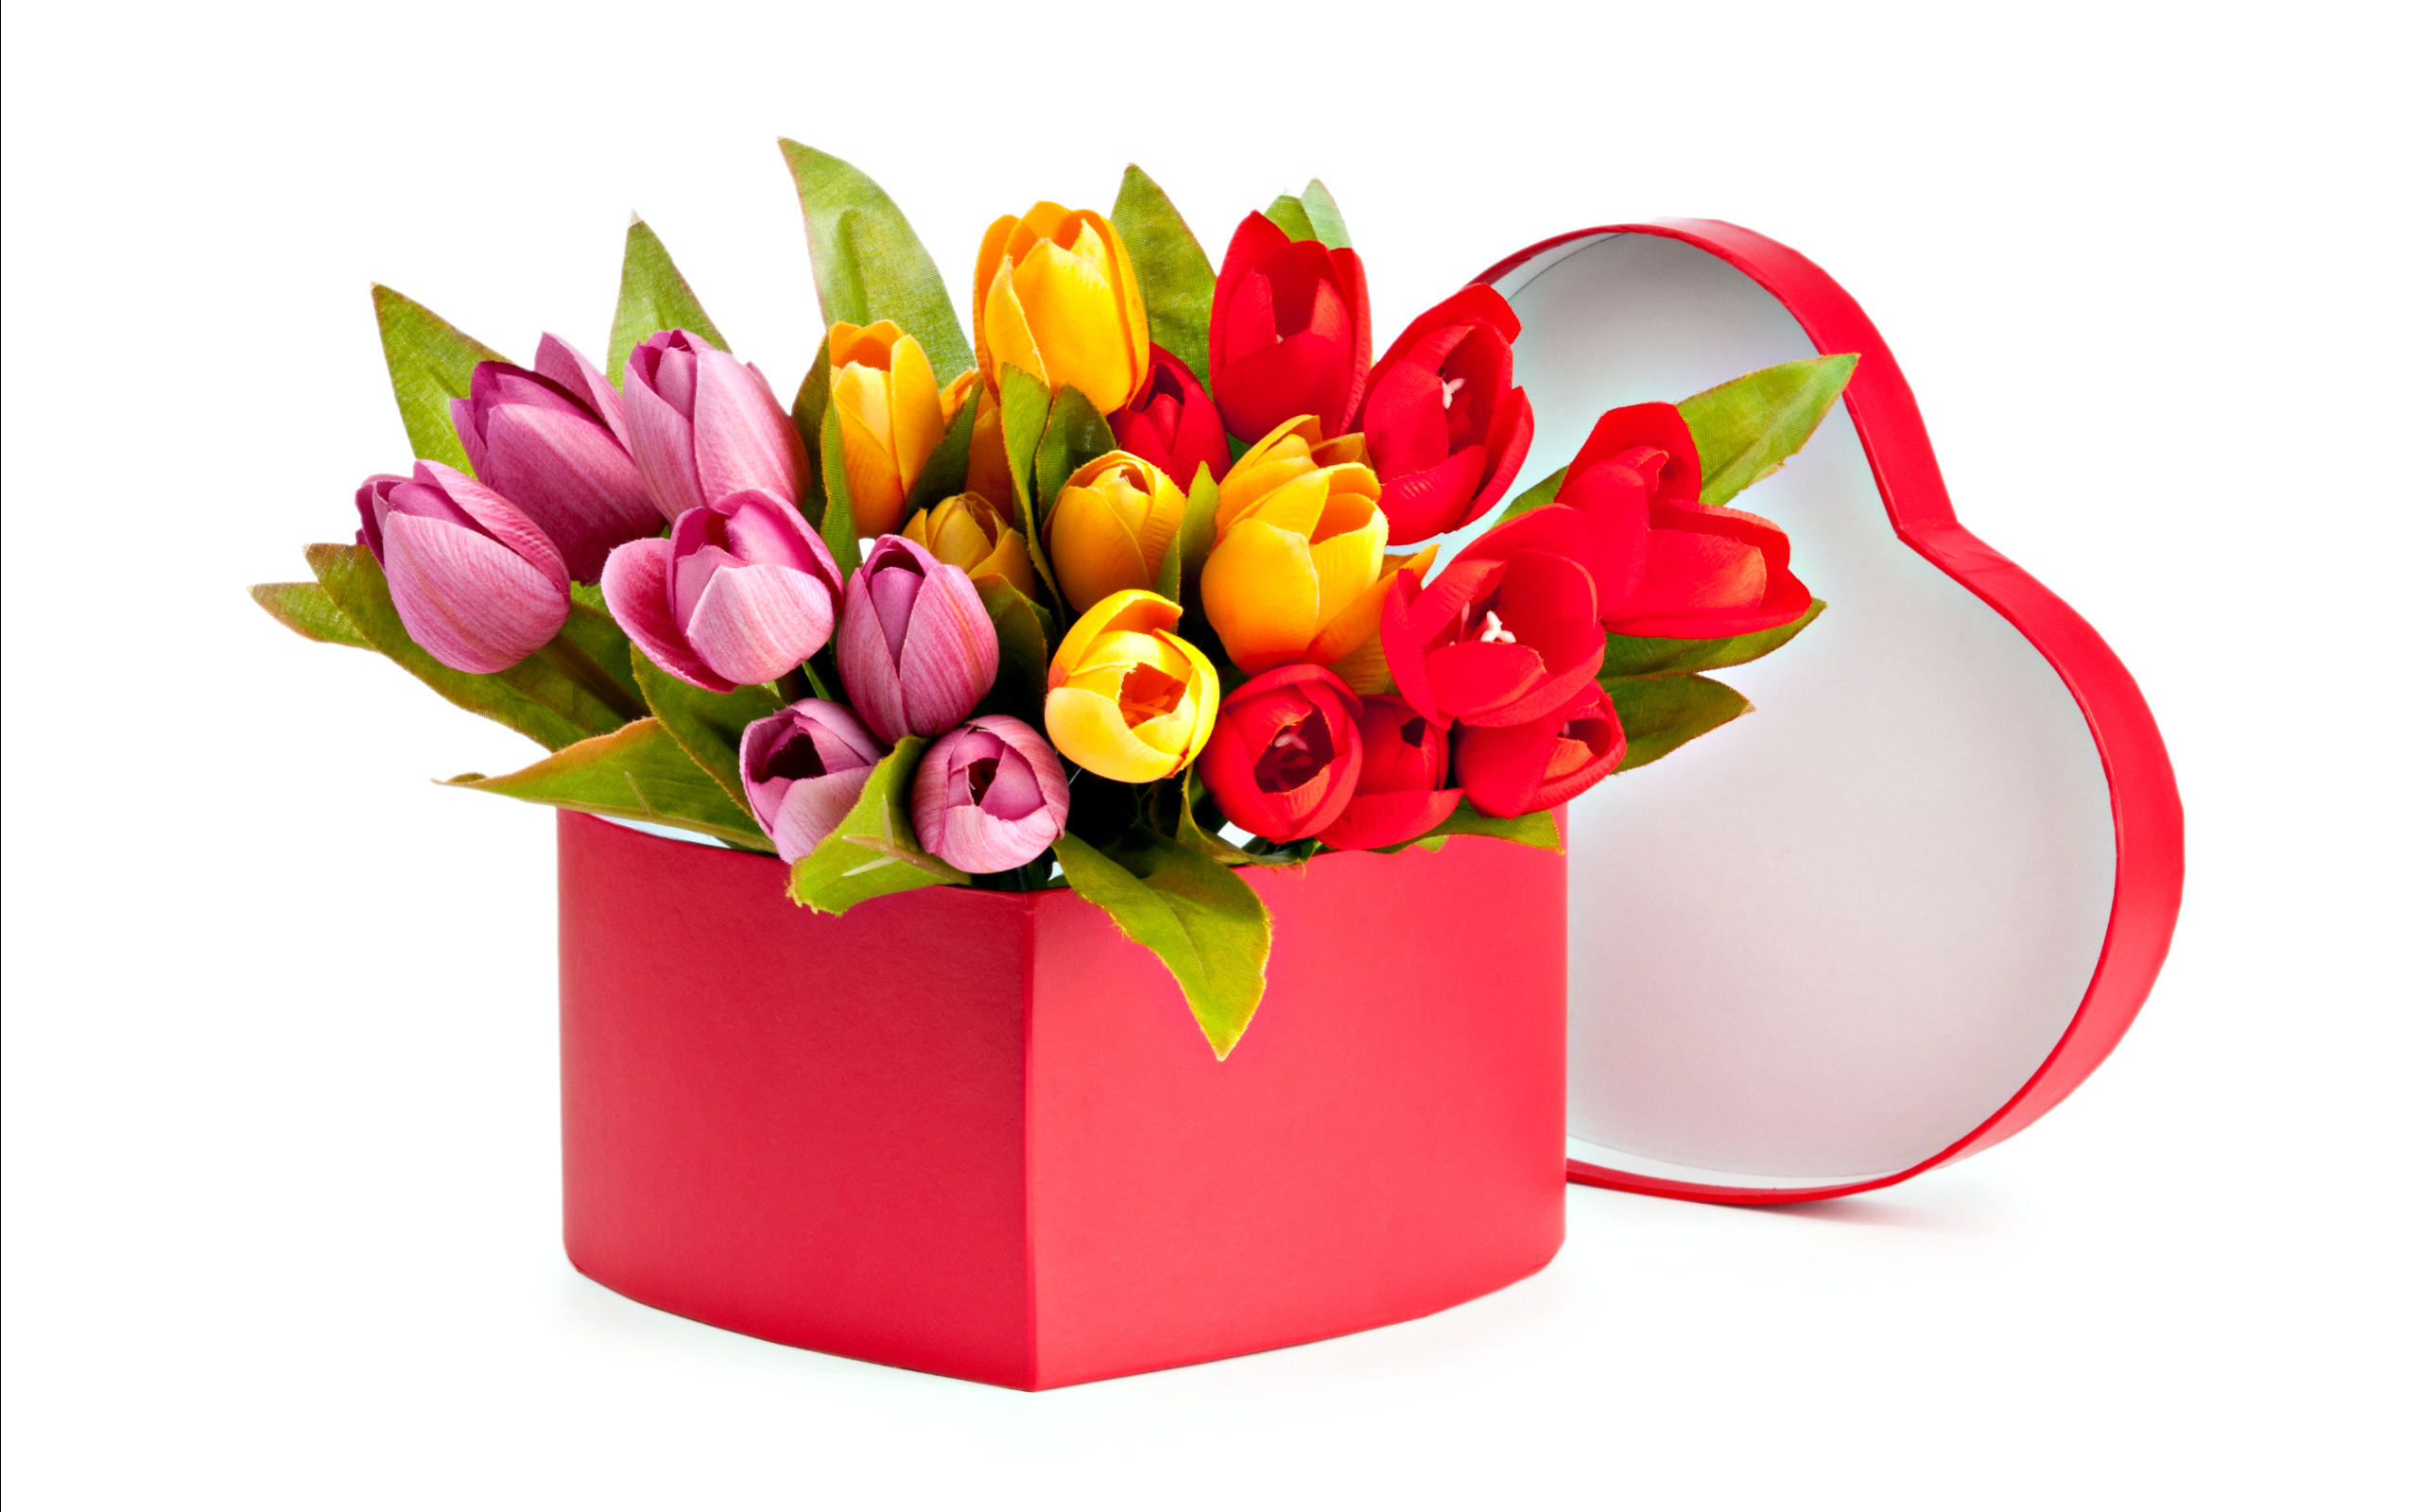 red flower, man made, flower, box, colorful, colors, pink flower, tulip, yellow flower